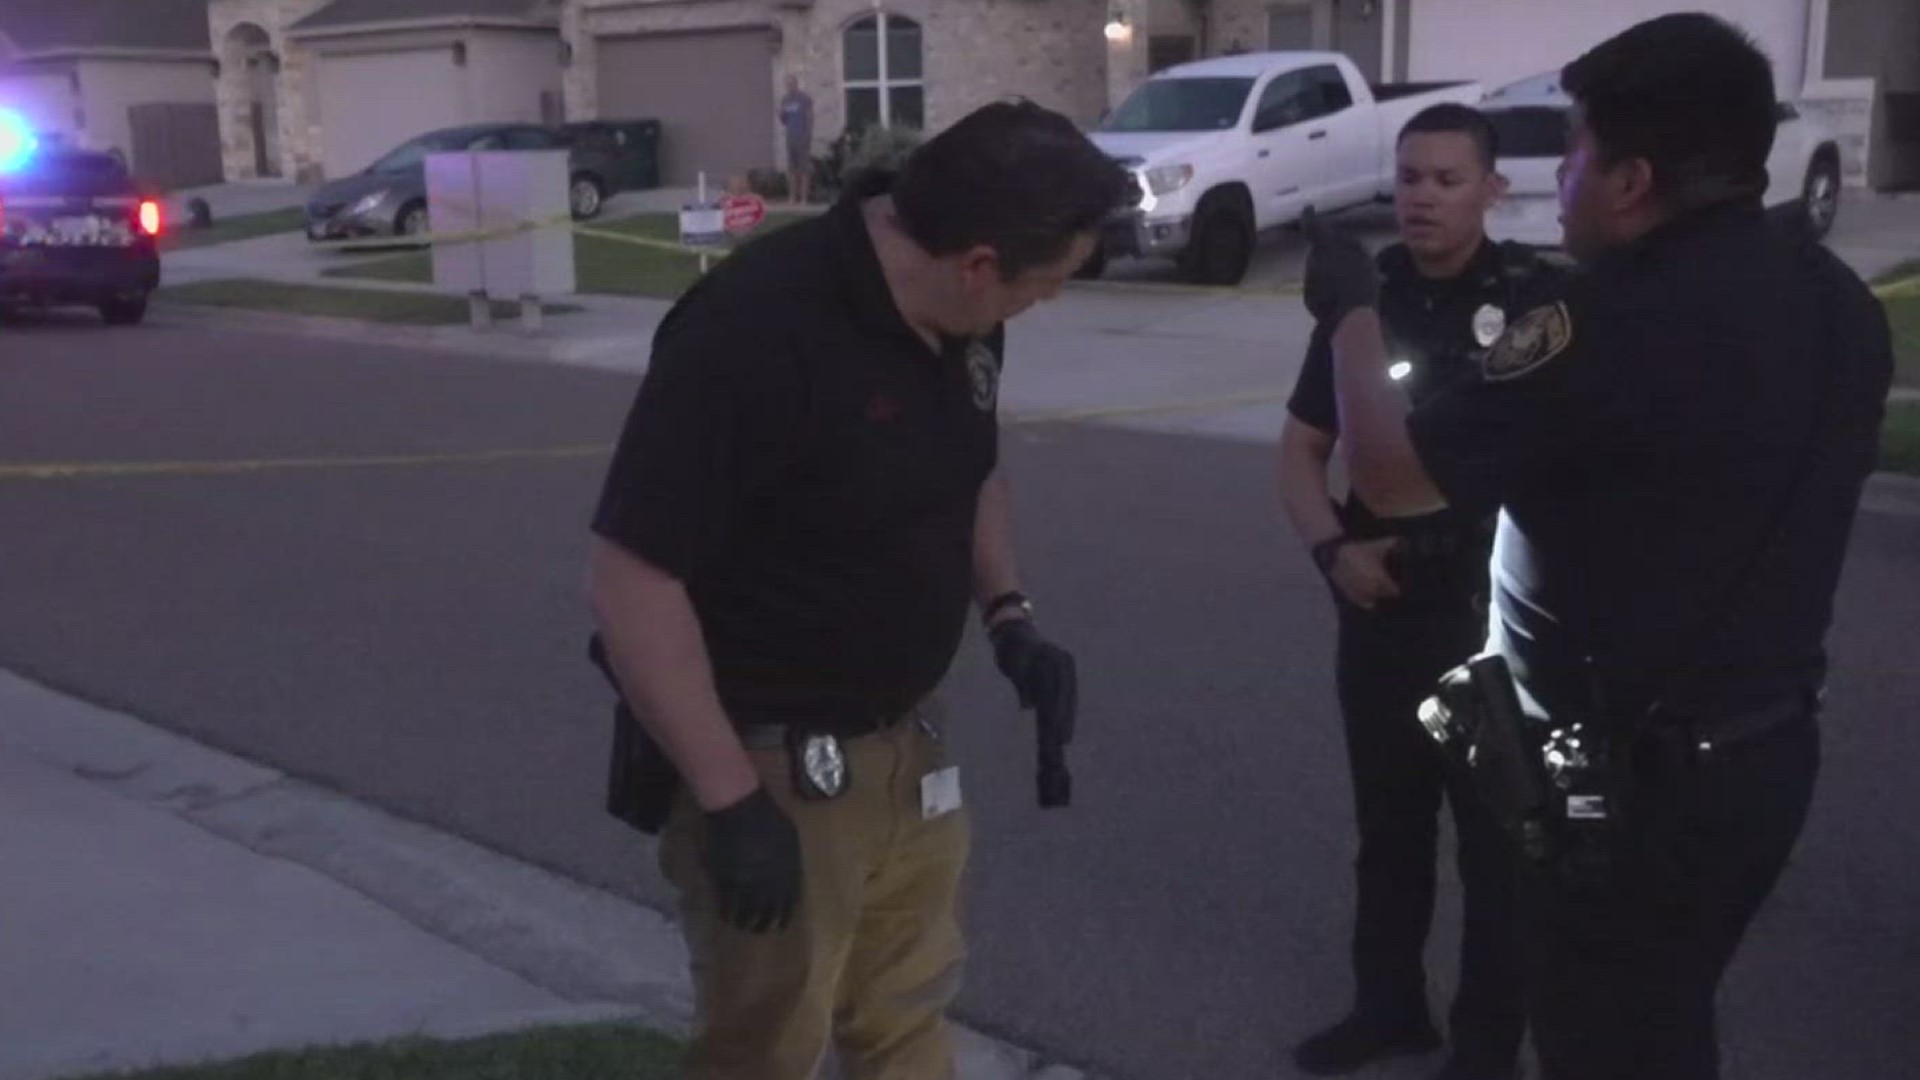 Corpus Christi Police were called just after 3 a.m. Friday to a home on Pennine Way and found a juvenile with serious injuries.